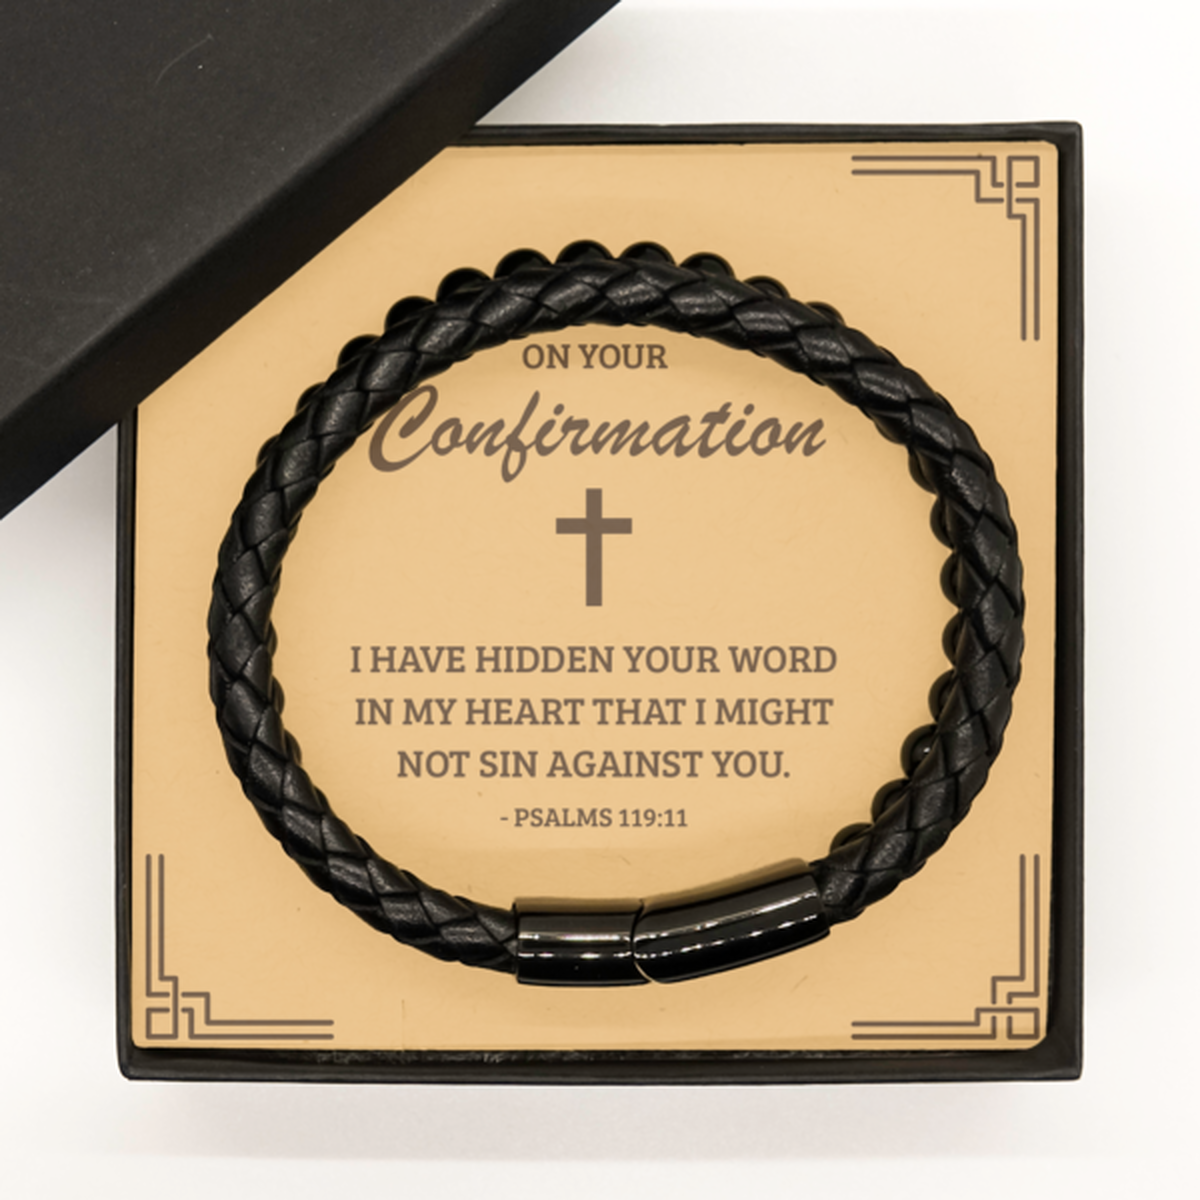 Confirmation Gifts for Teenage Boys, I have hidden your word in my heart, Stone Leather Bracelet with Bible Verse Message Card, Religious Catholic Bracelet for Son, Grandson, Dad, Godfather